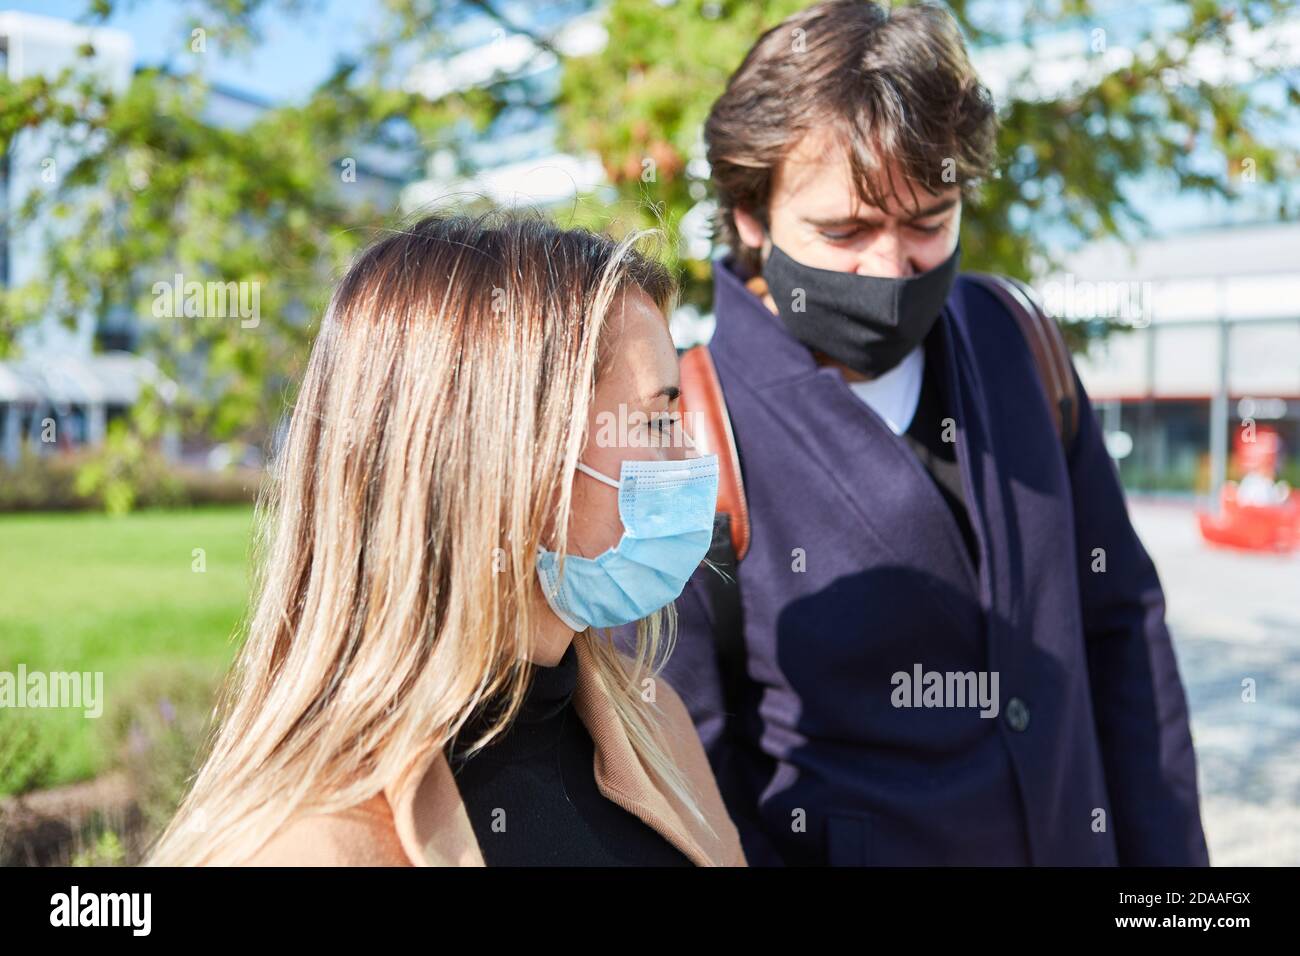 Passers-by in the city with face masks because of the Covid-19 pandemic Stock Photo